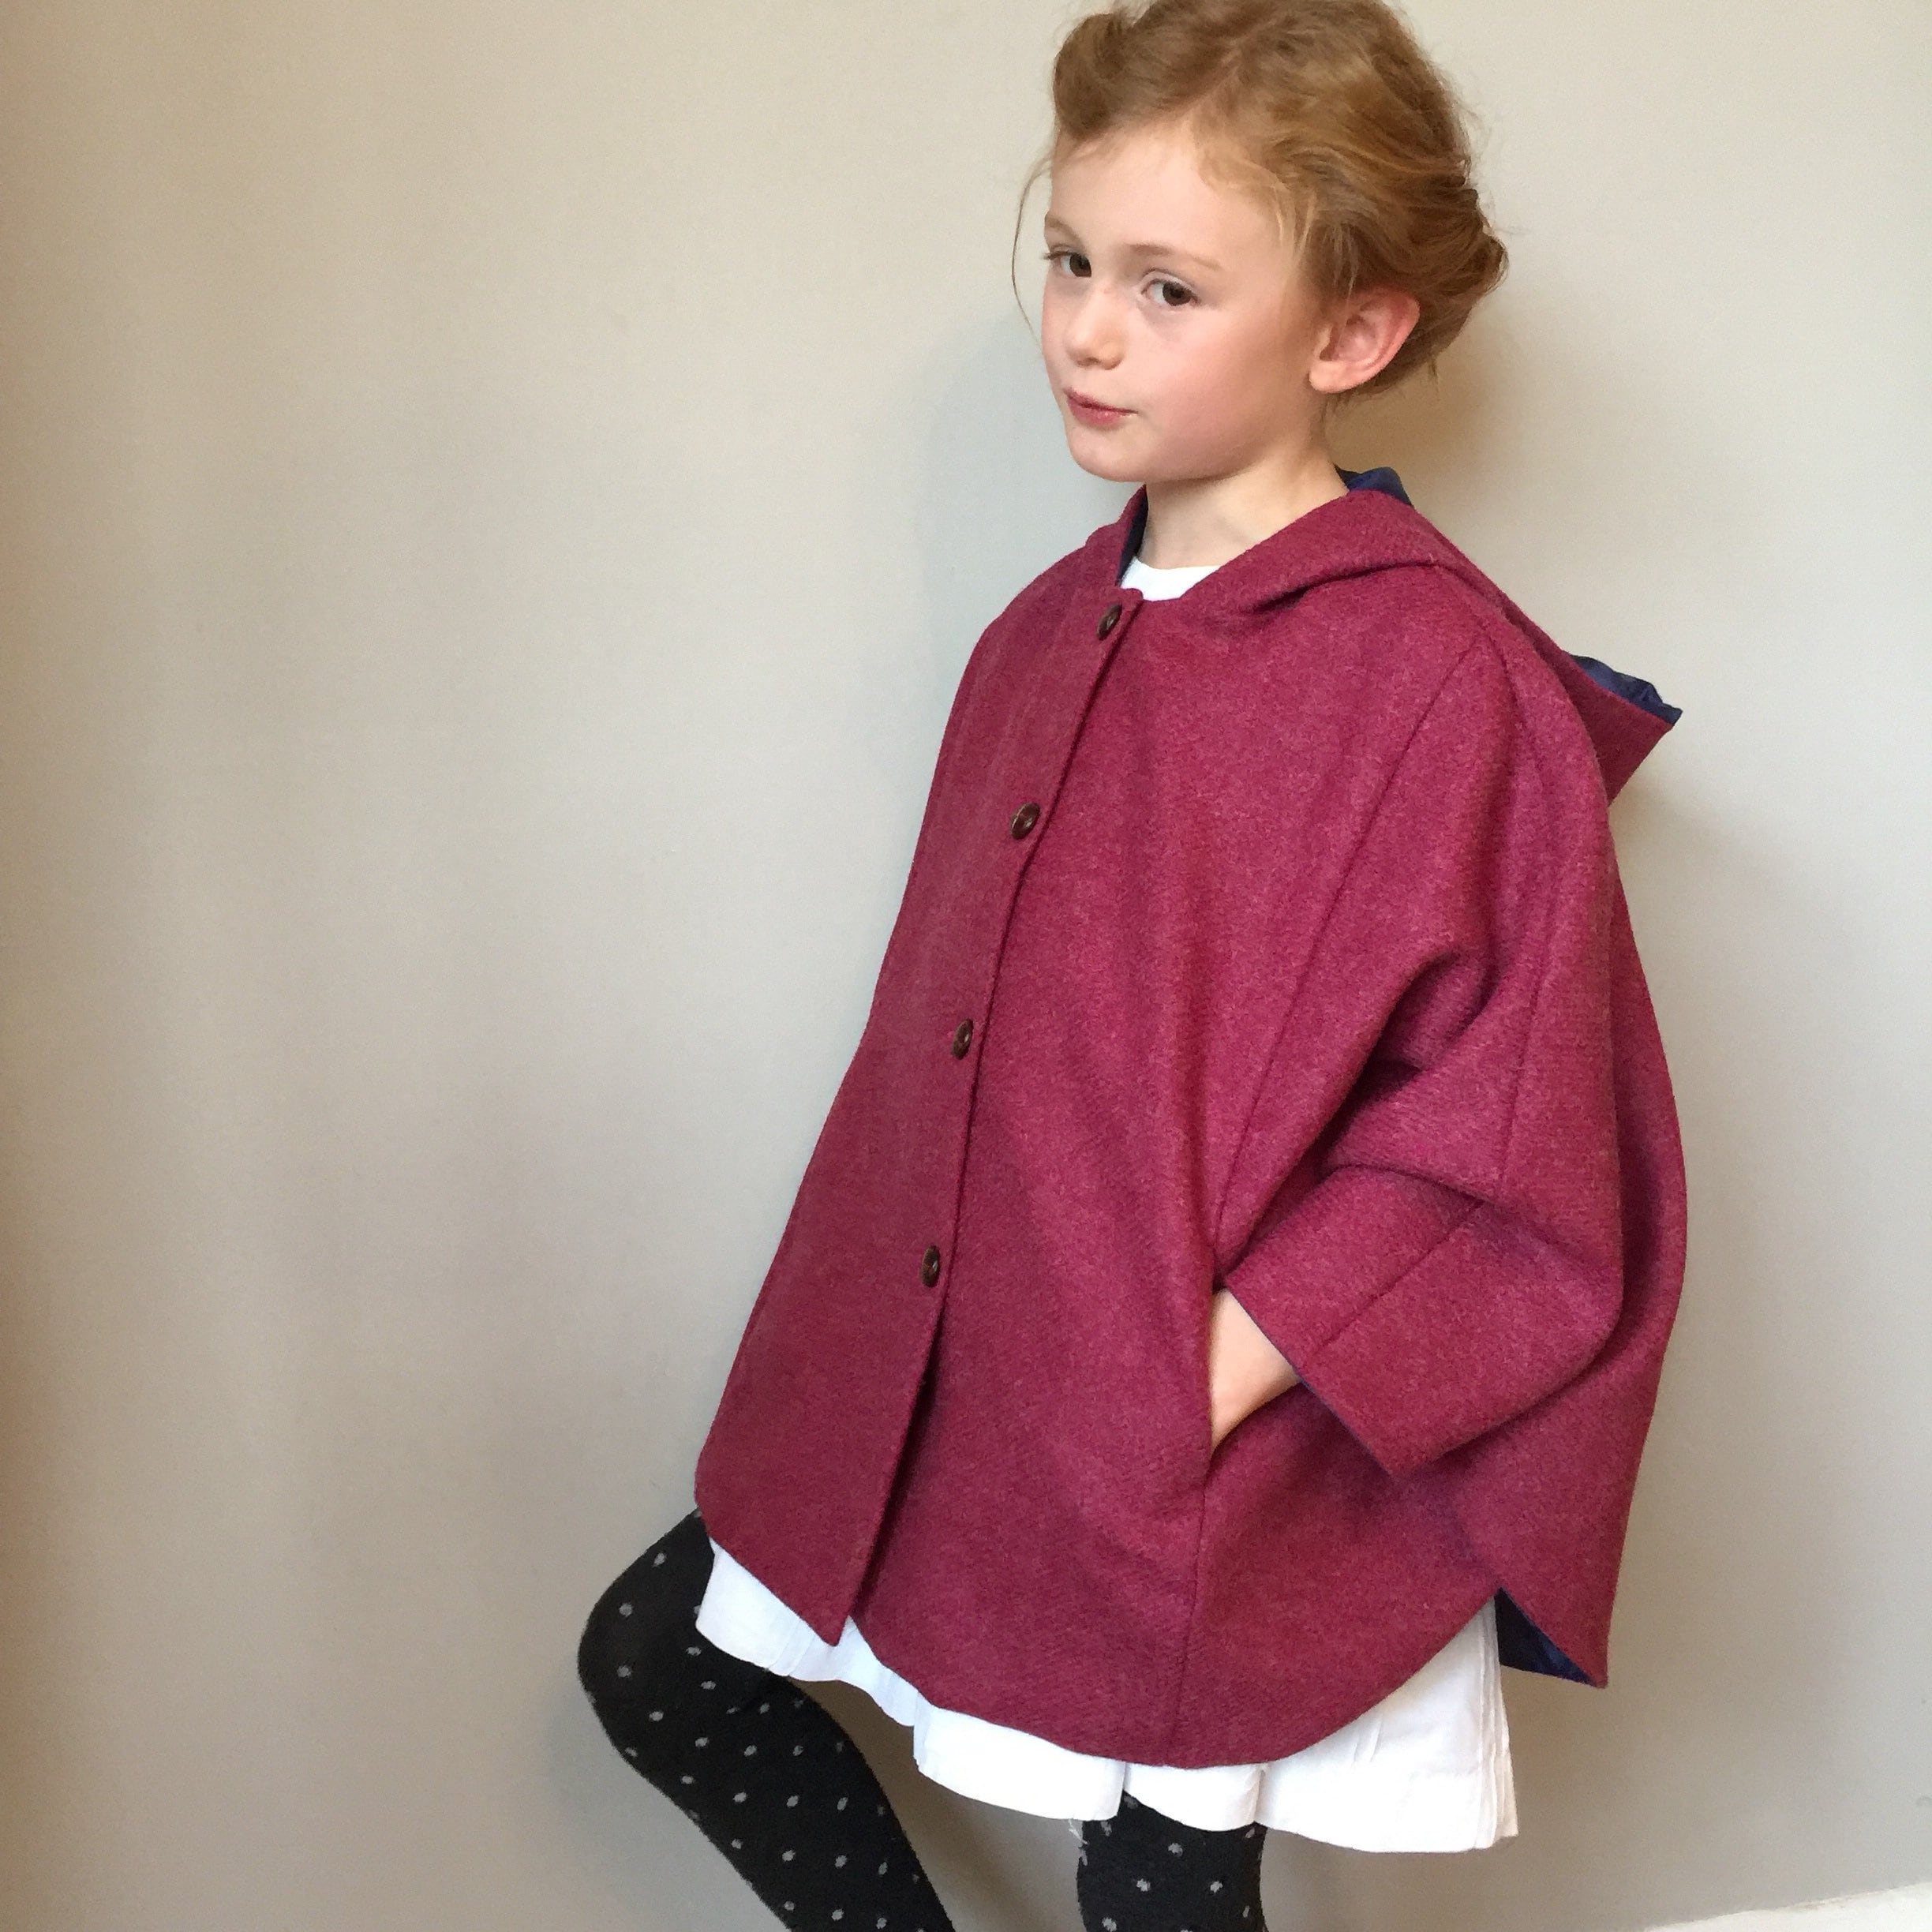 Girls 100% Shetland Wool Cape Fully Lined in Rich Navy With - Etsy